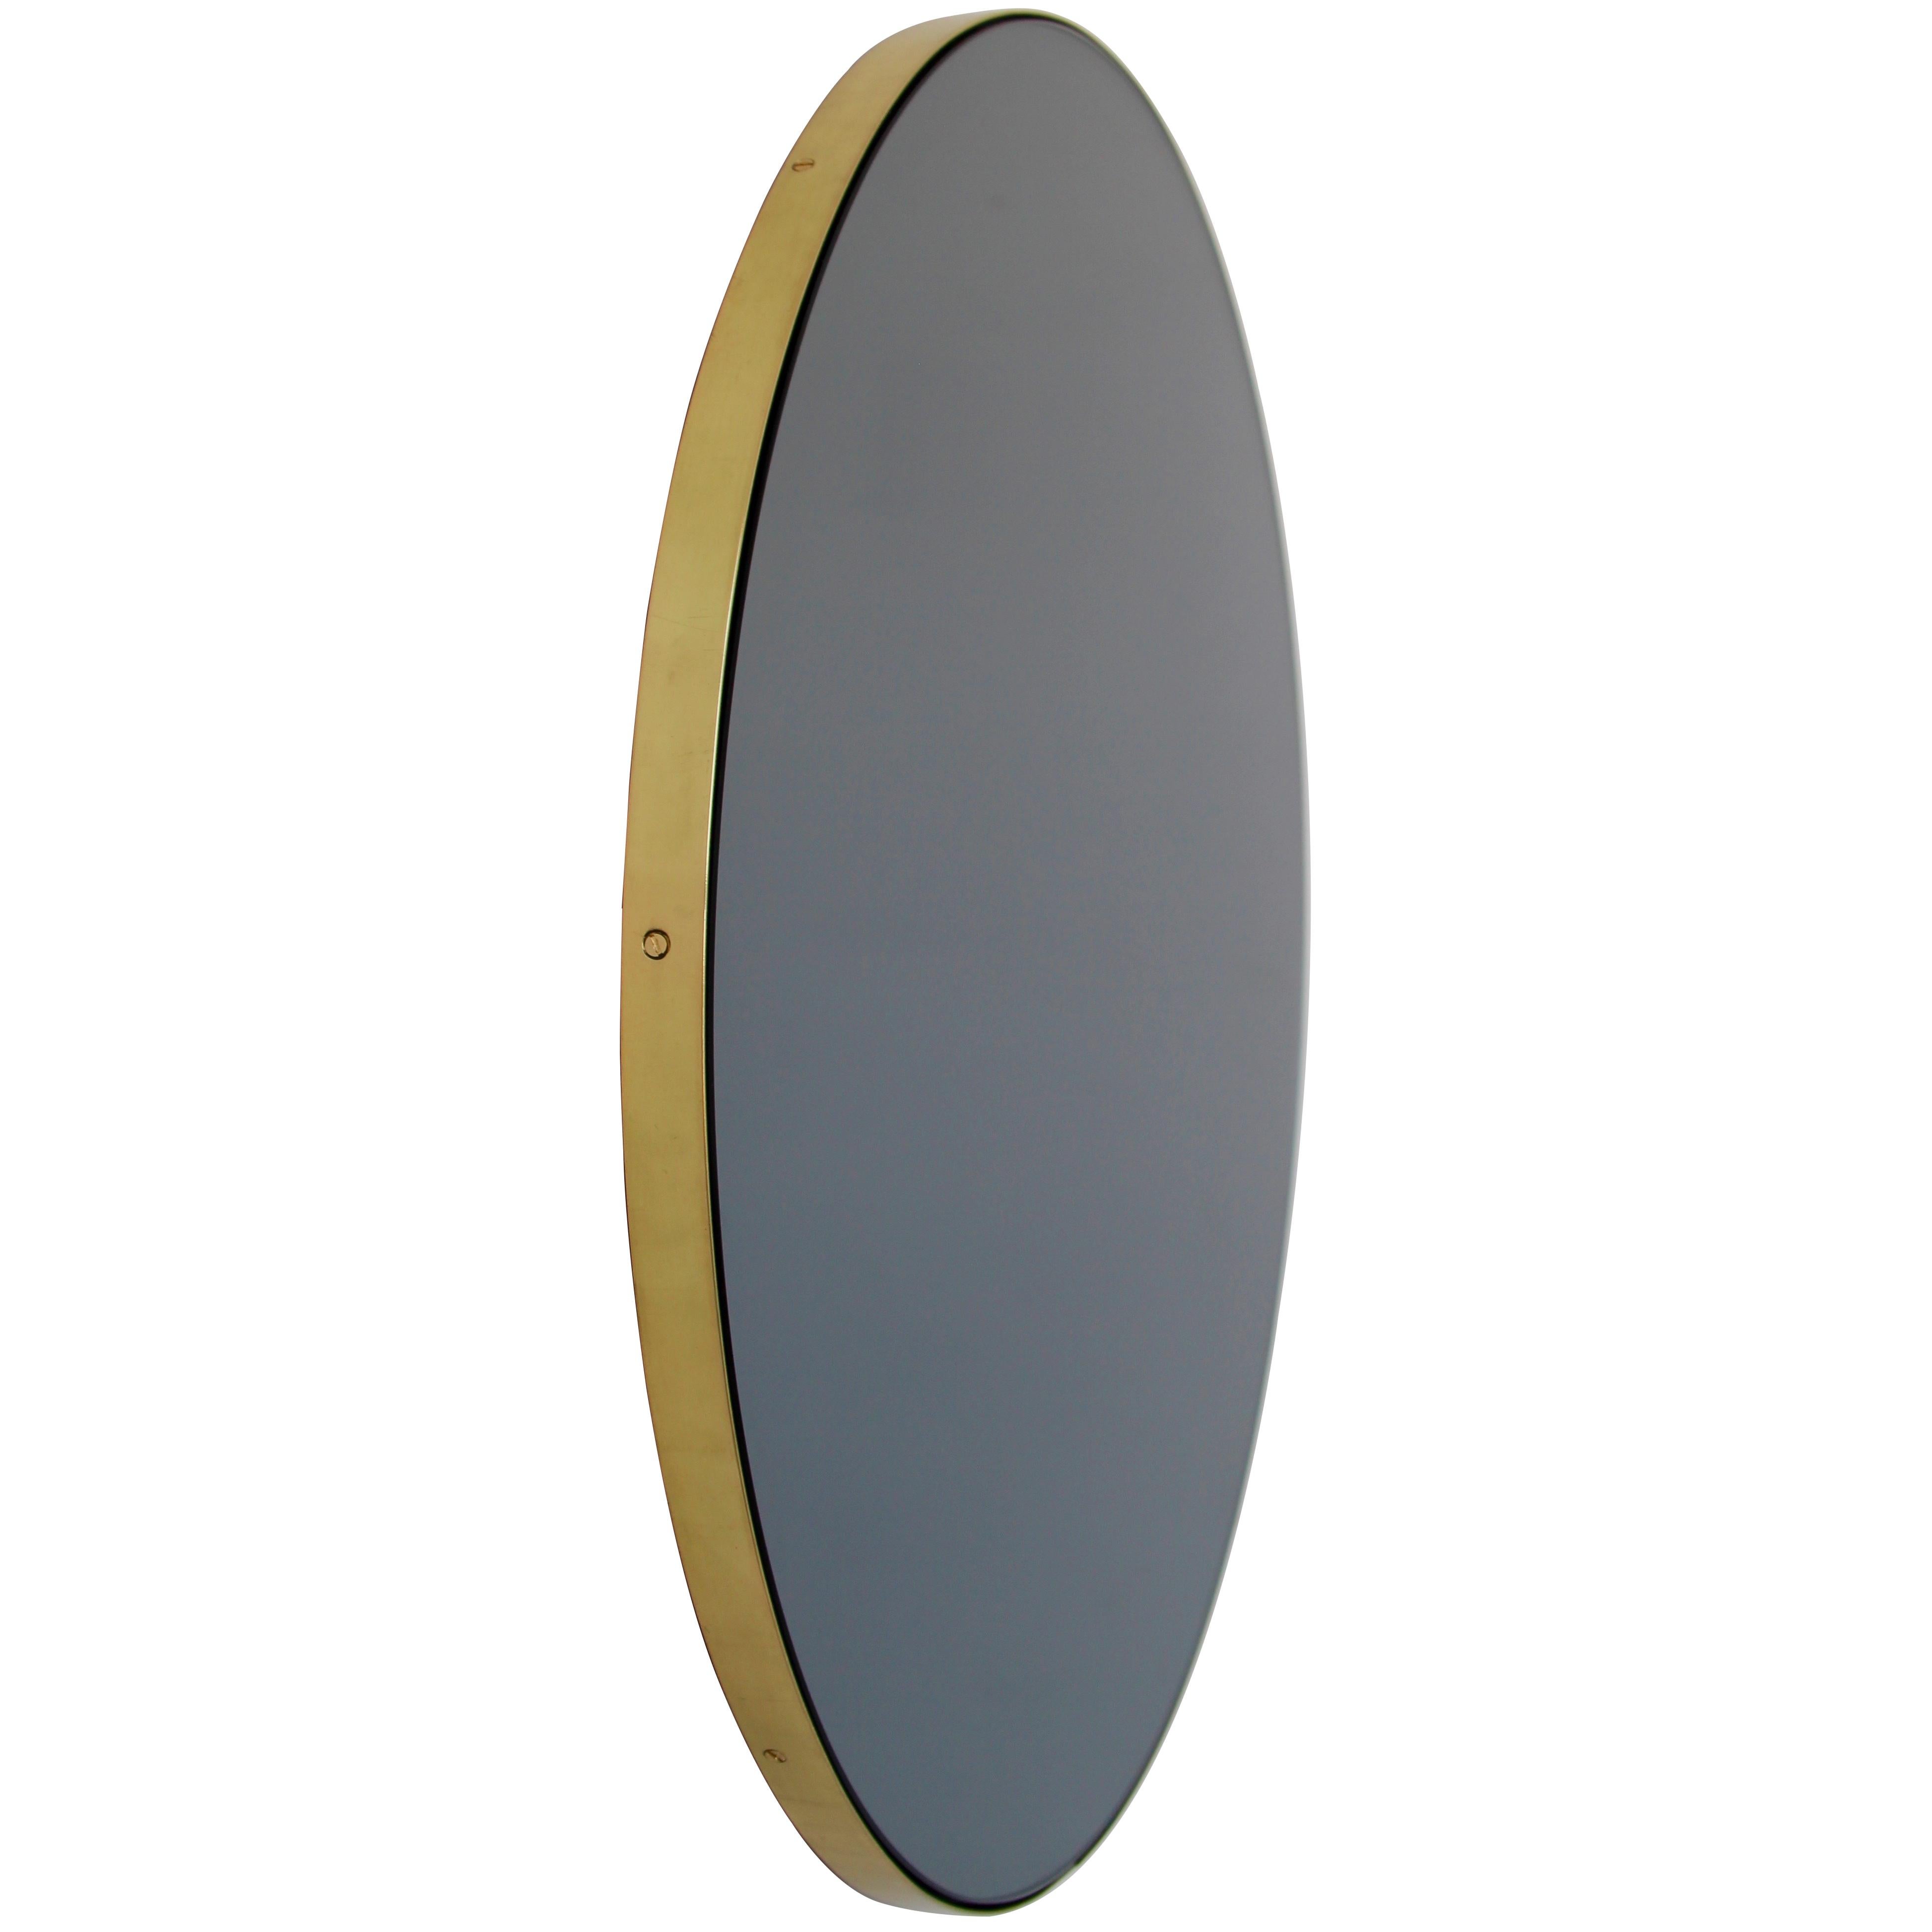 Minimalist black tinted round mirror with an elegant solid brushed brass frame. The detailing and finish, including visible brass screws, emphasise the crafty and quality feel of the mirror, a true signature of our brand. Designed and handcrafted in